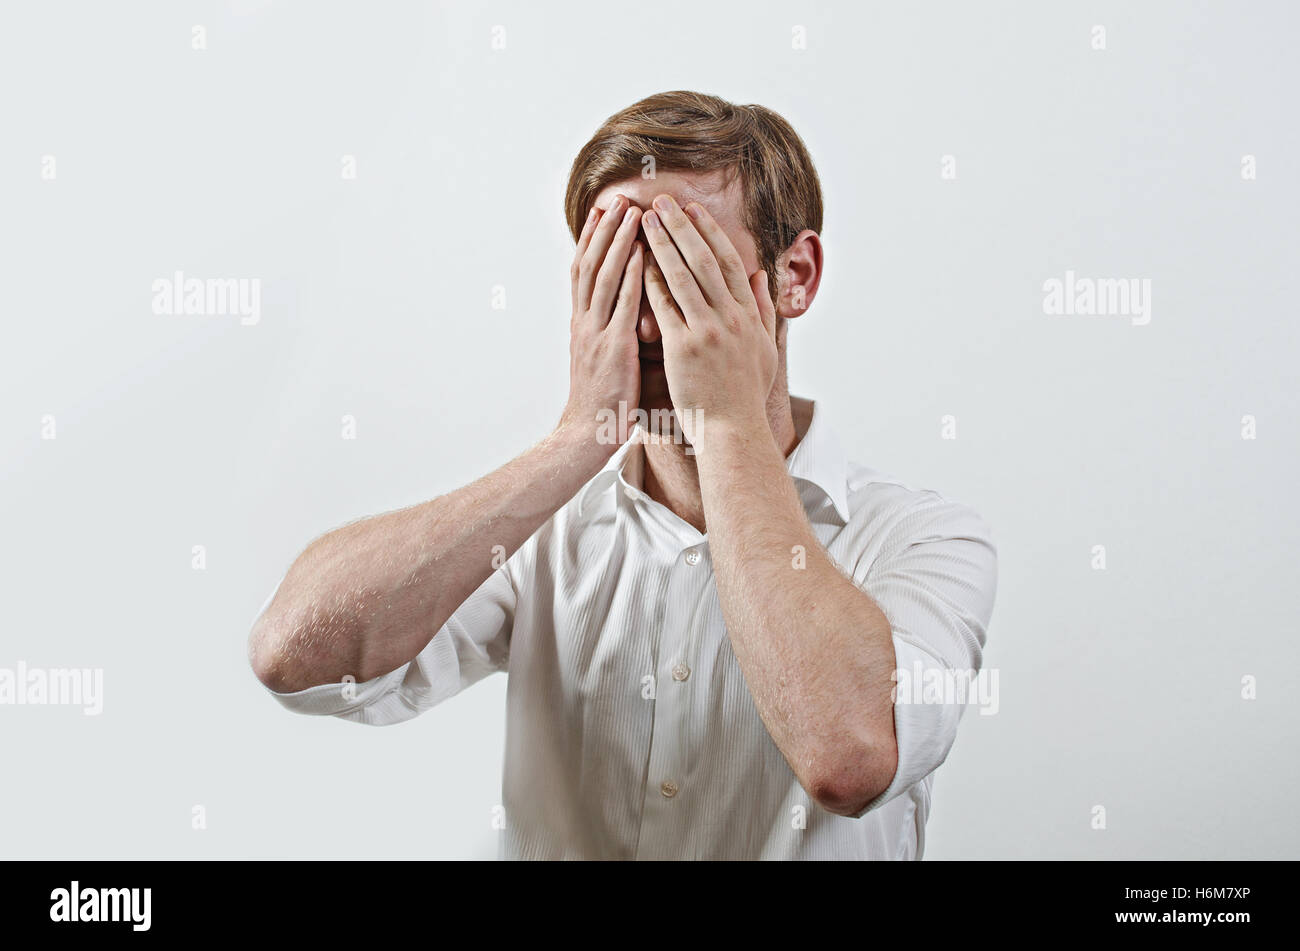 Young Adult Male Wearing White Shirt Covers His Face by Both Hands, Gesturing He Has Made a Big Mistake Stock Photo